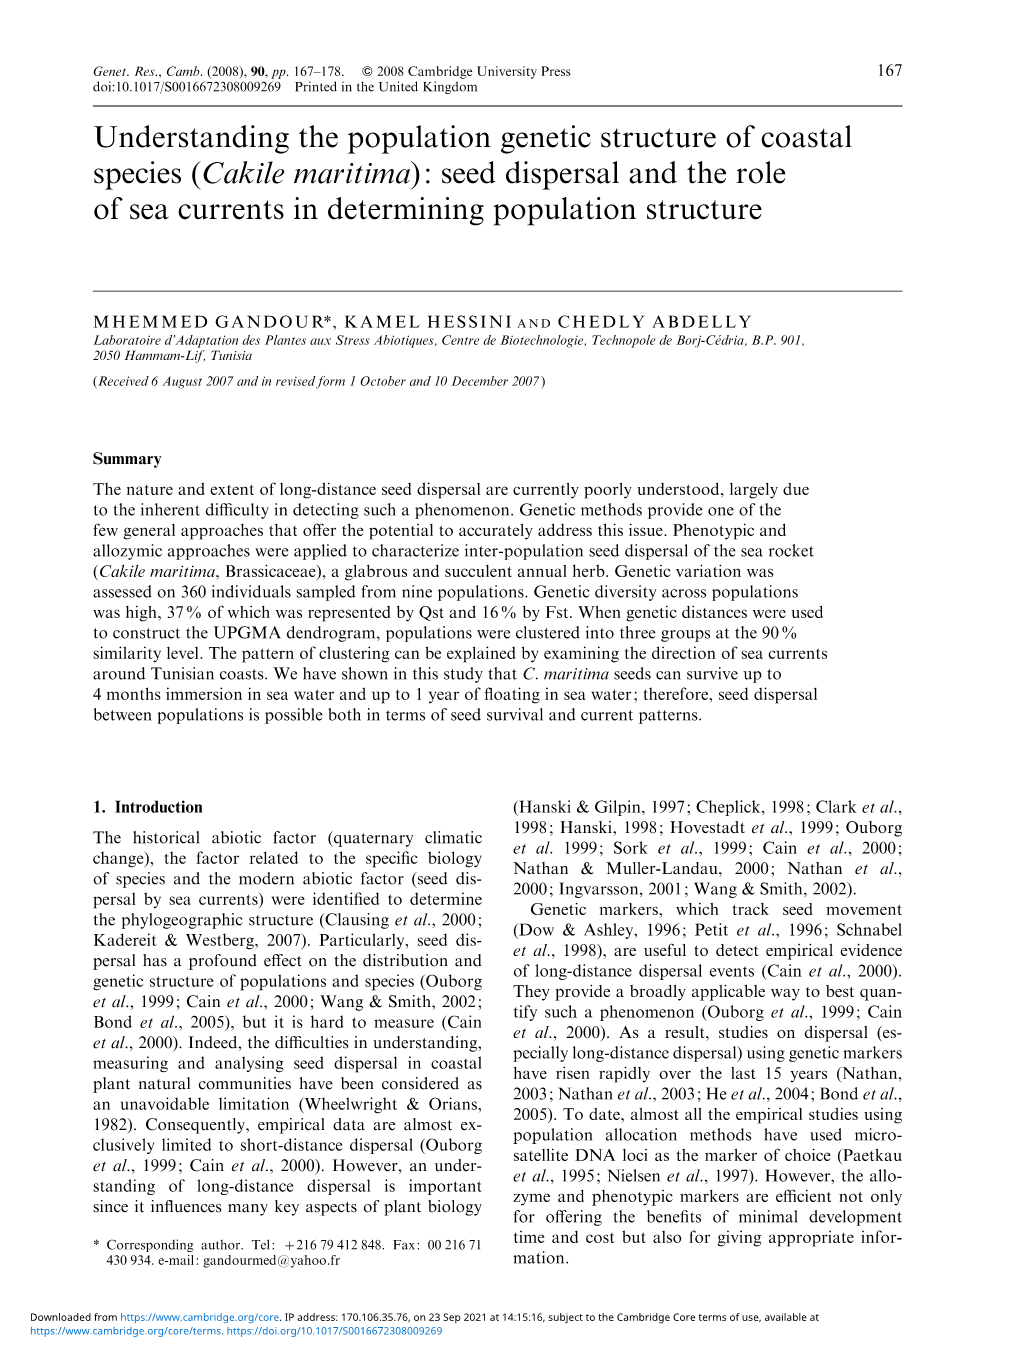 Understanding the Population Genetic Structure of Coastal Species (Cakile Maritima): Seed Dispersal and the Role of Sea Currents in Determining Population Structure